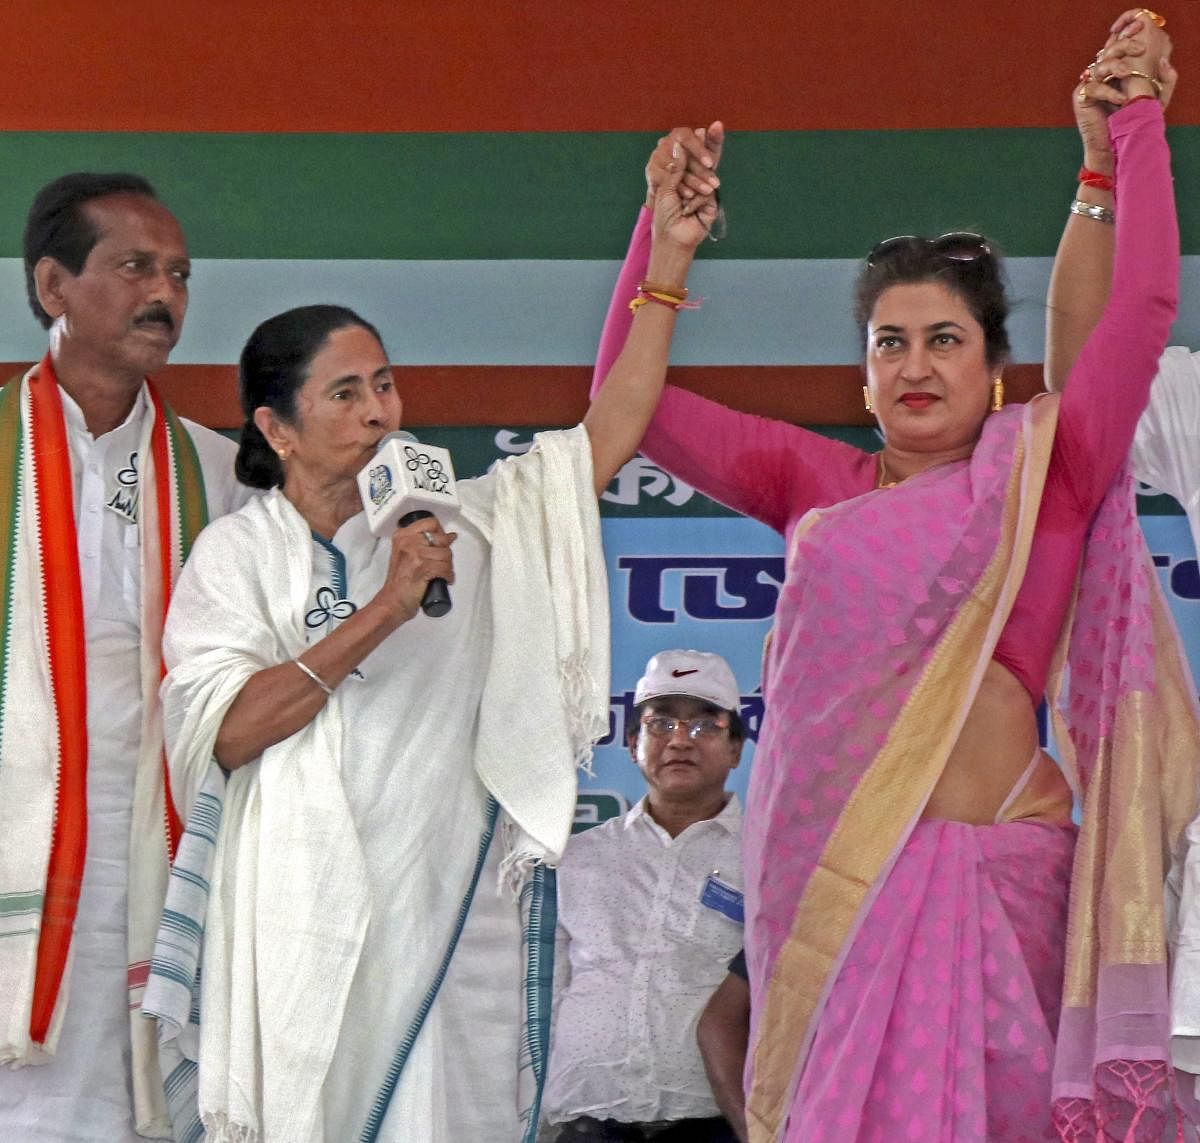 TMC supremo Mamata Banerjee campaigns for party candidates Satabdi Roy (R) from Birbhum constituency and Asit Mal (L) from Bolpur constituency in a rally at Suri in Birbhum district of West Bengal on Thursday. PTI